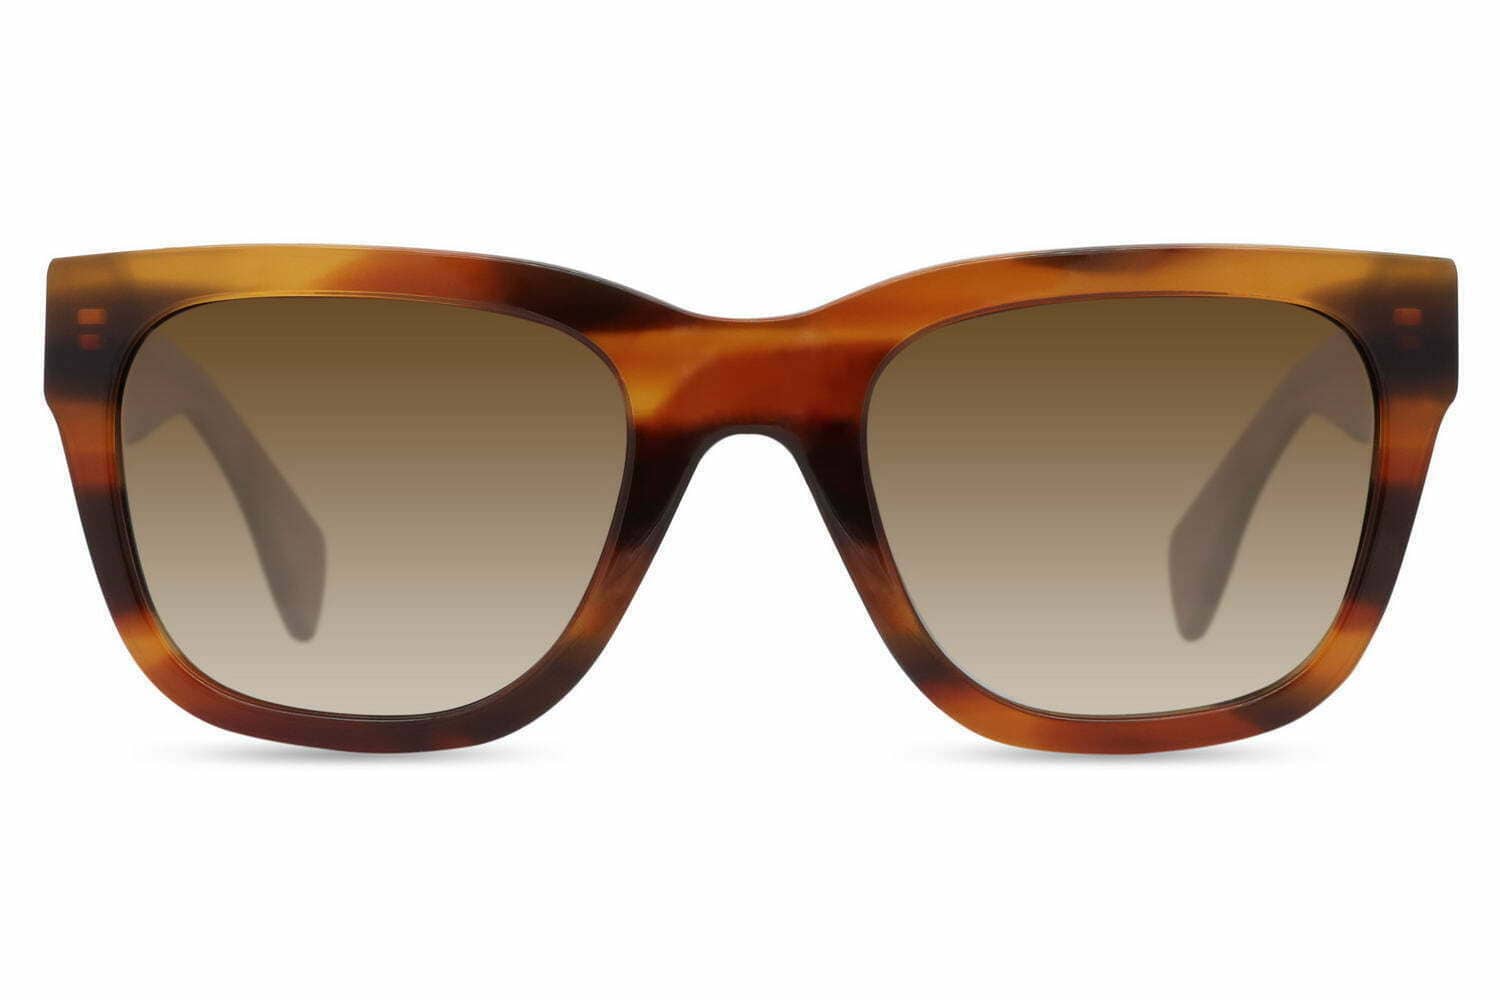 Delios sunglasses with Brown color lens and Brown color frame